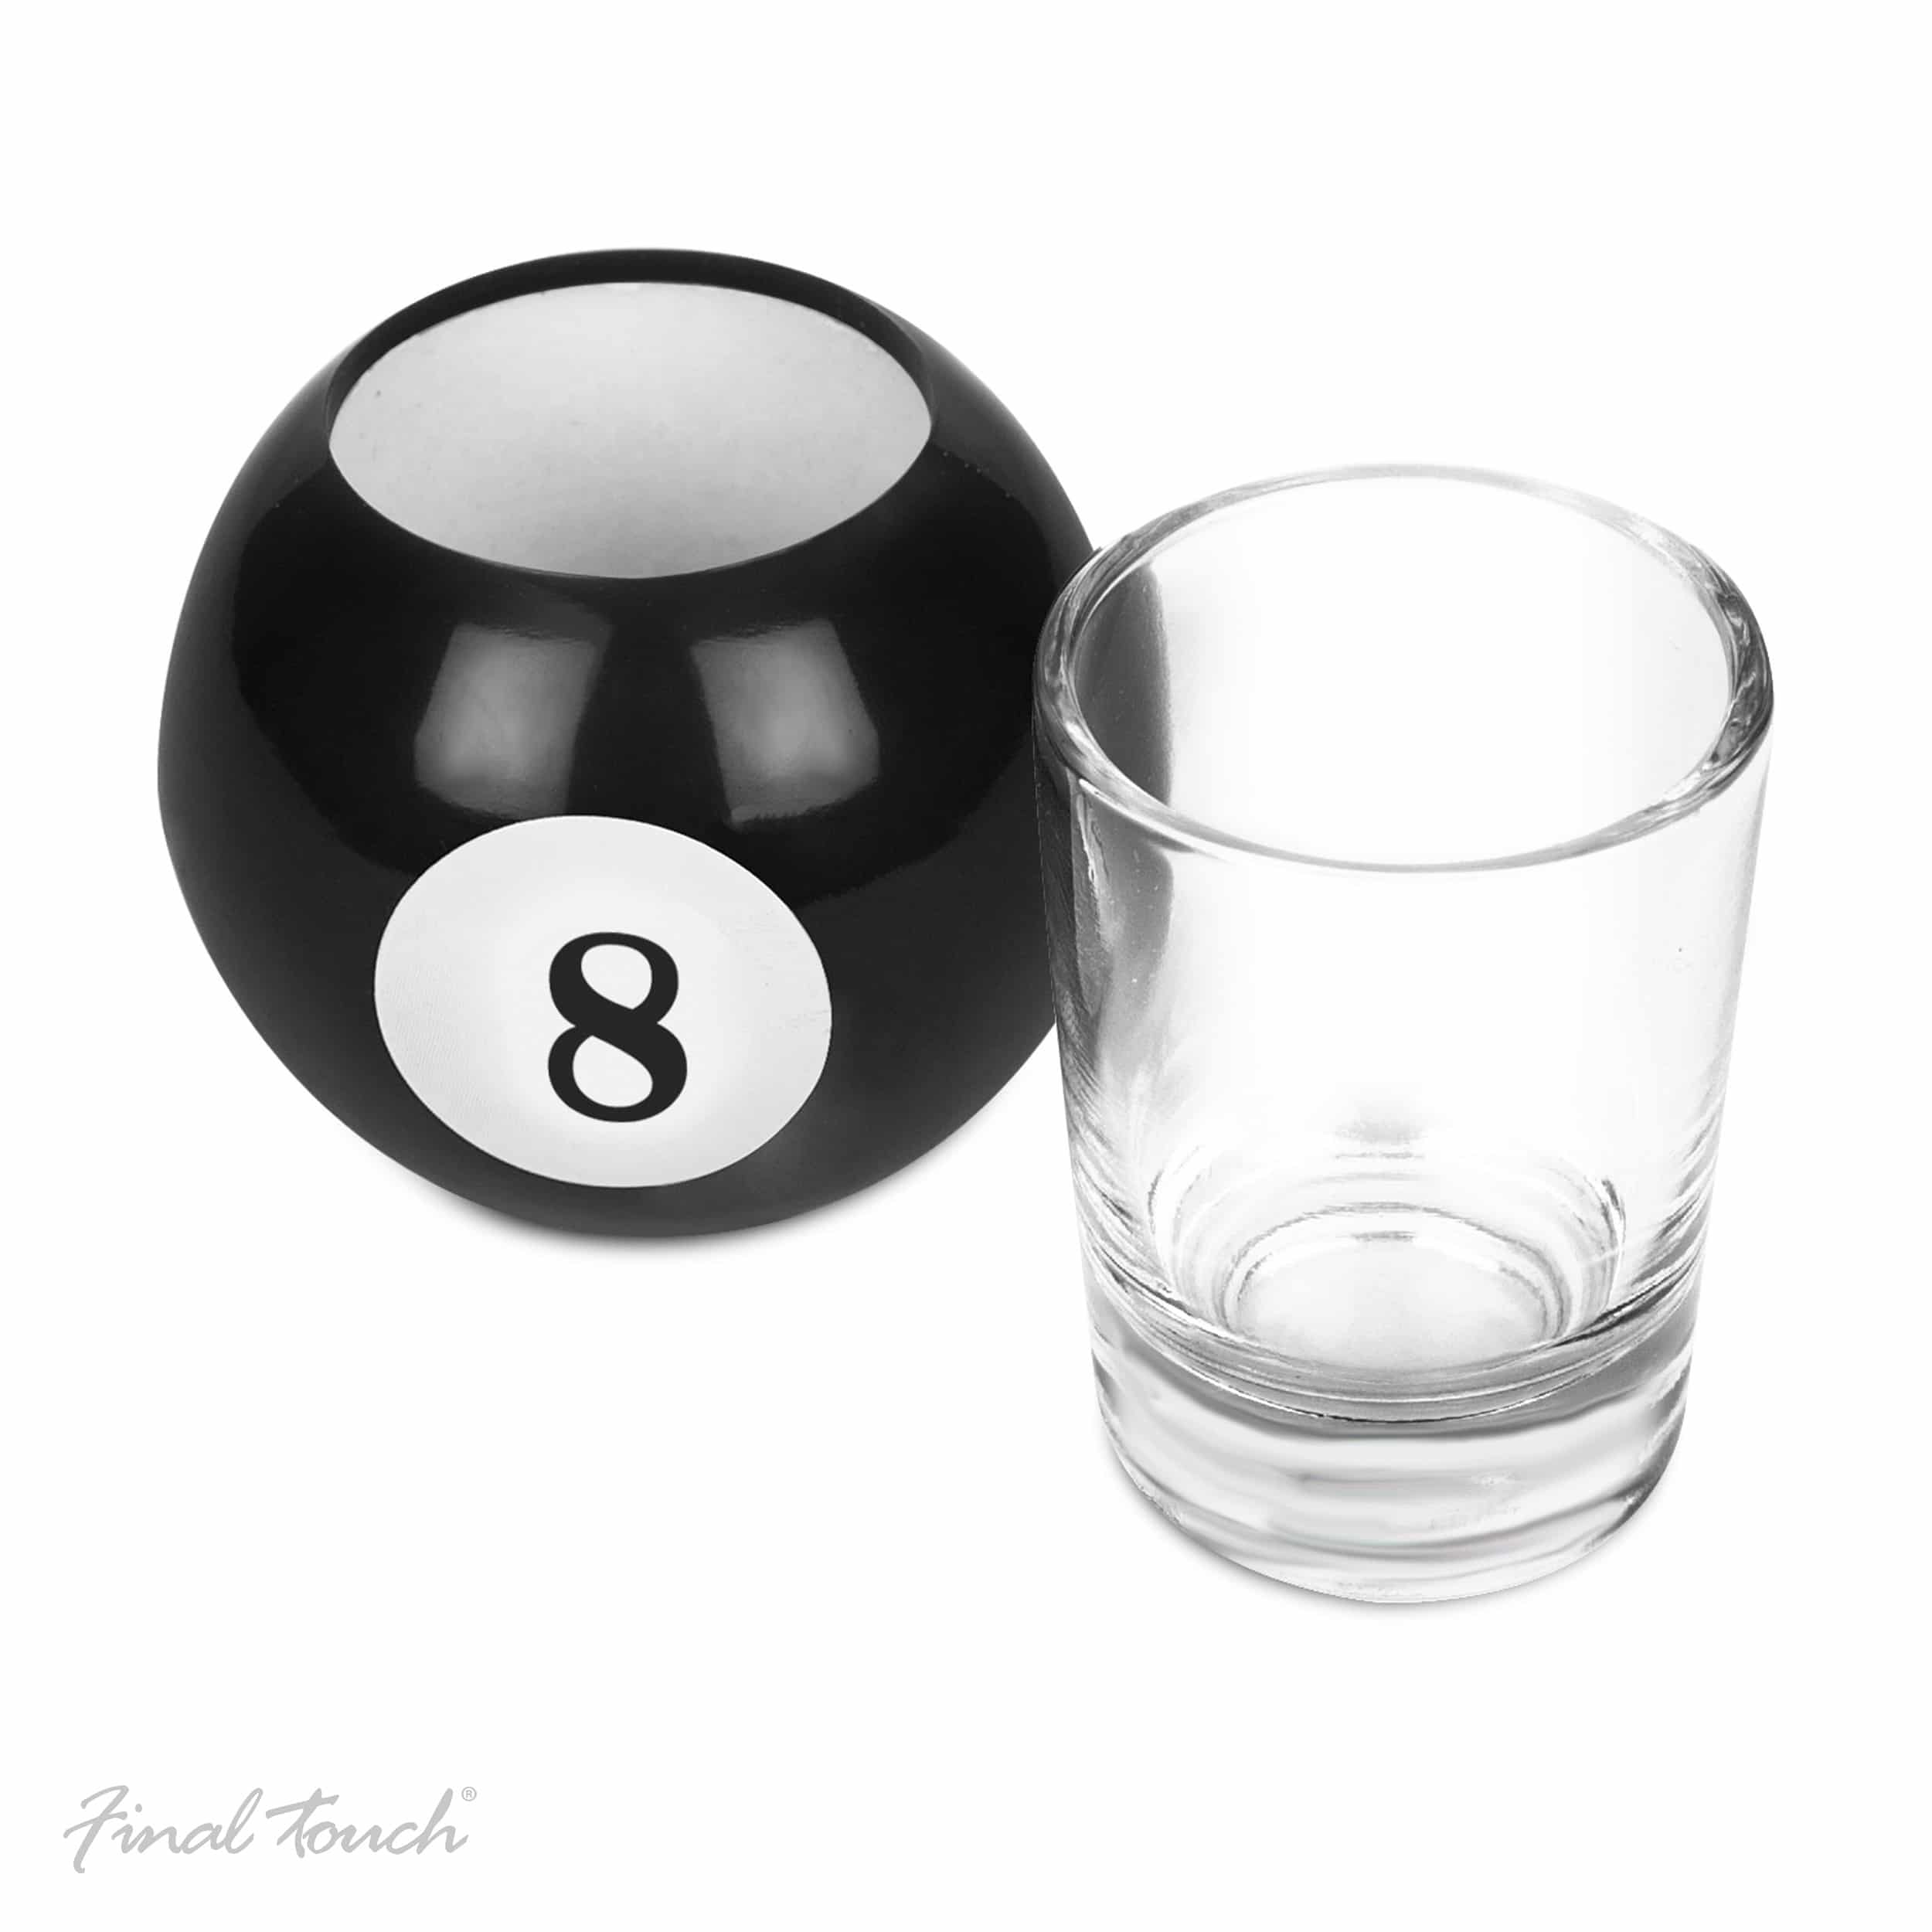 Novelty Shot Glasses & Tray Drinking Gift Set FTA1836 by Final Touch Final Touch Set of 6 Pool Shots 